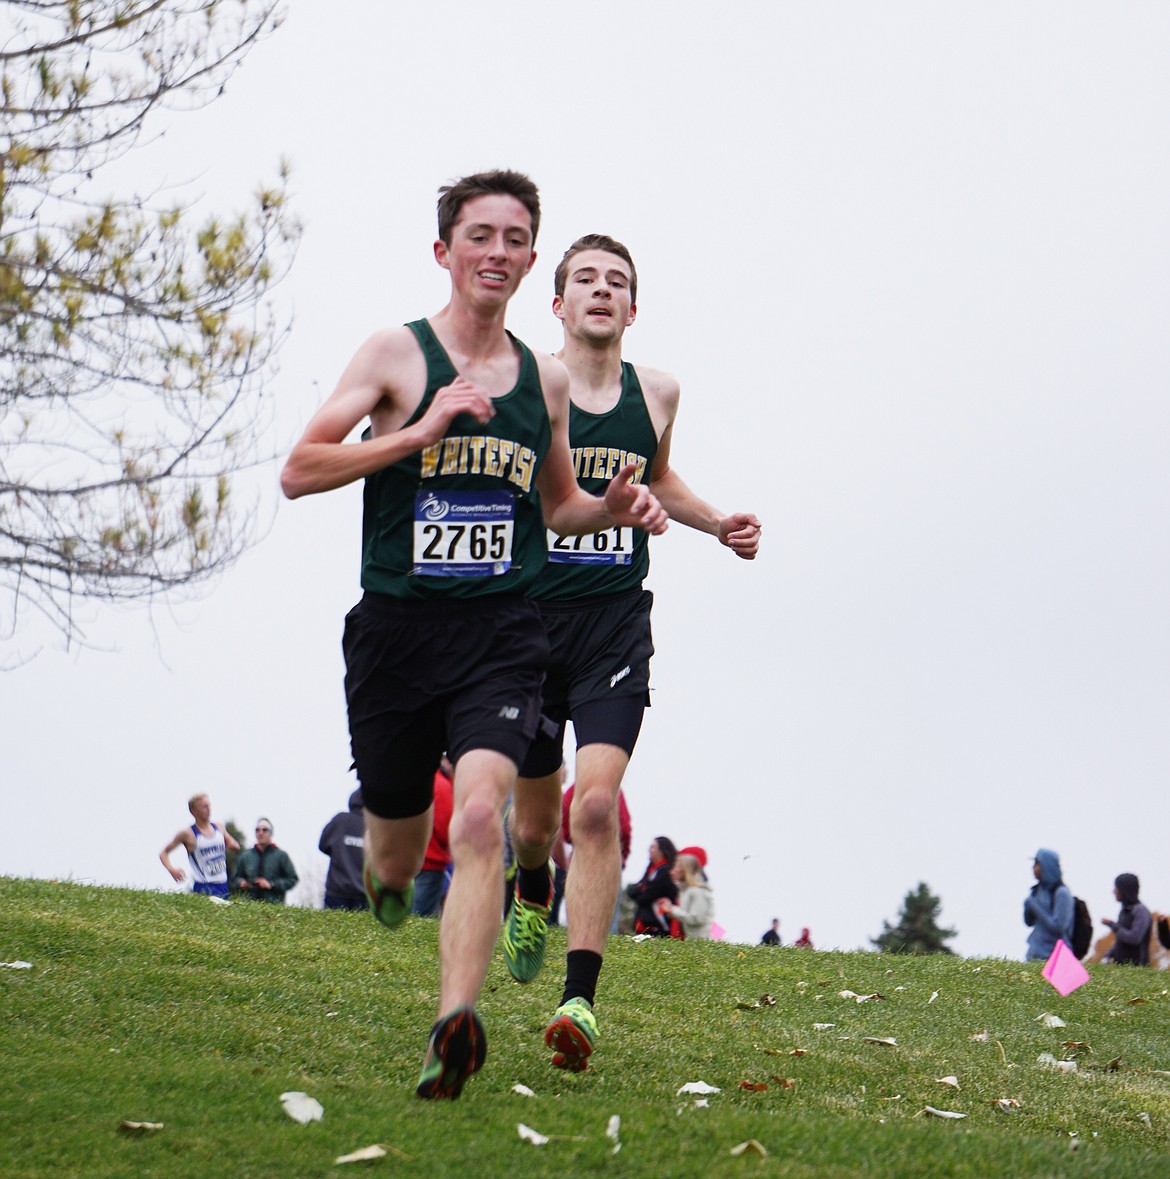 Miles Vrentas leads teammate Bridger Gaertner at the Western A Fall Classic. Bridger would pass Miles at the finish for 13th&#160;place overall (17:33.28) to Miles in 14th&#160;(17:33.97) in a very close race. Both athletes earned All-conference honors. (Matt Weller photo)&#160;